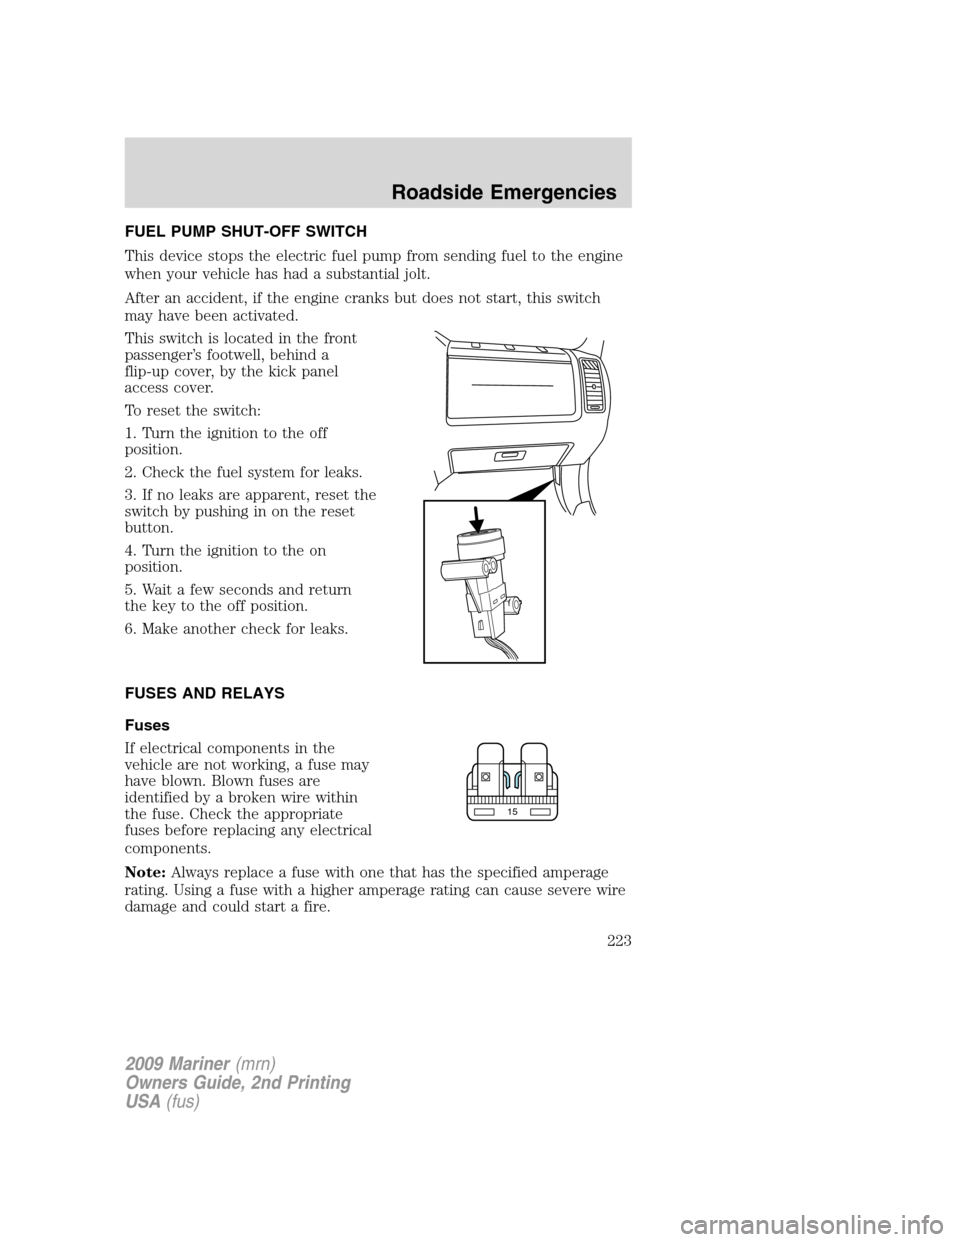 Mercury Mariner 2009  Owners Manuals FUEL PUMP SHUT-OFF SWITCH
This device stops the electric fuel pump from sending fuel to the engine
when your vehicle has had a substantial jolt.
After an accident, if the engine cranks but does not st